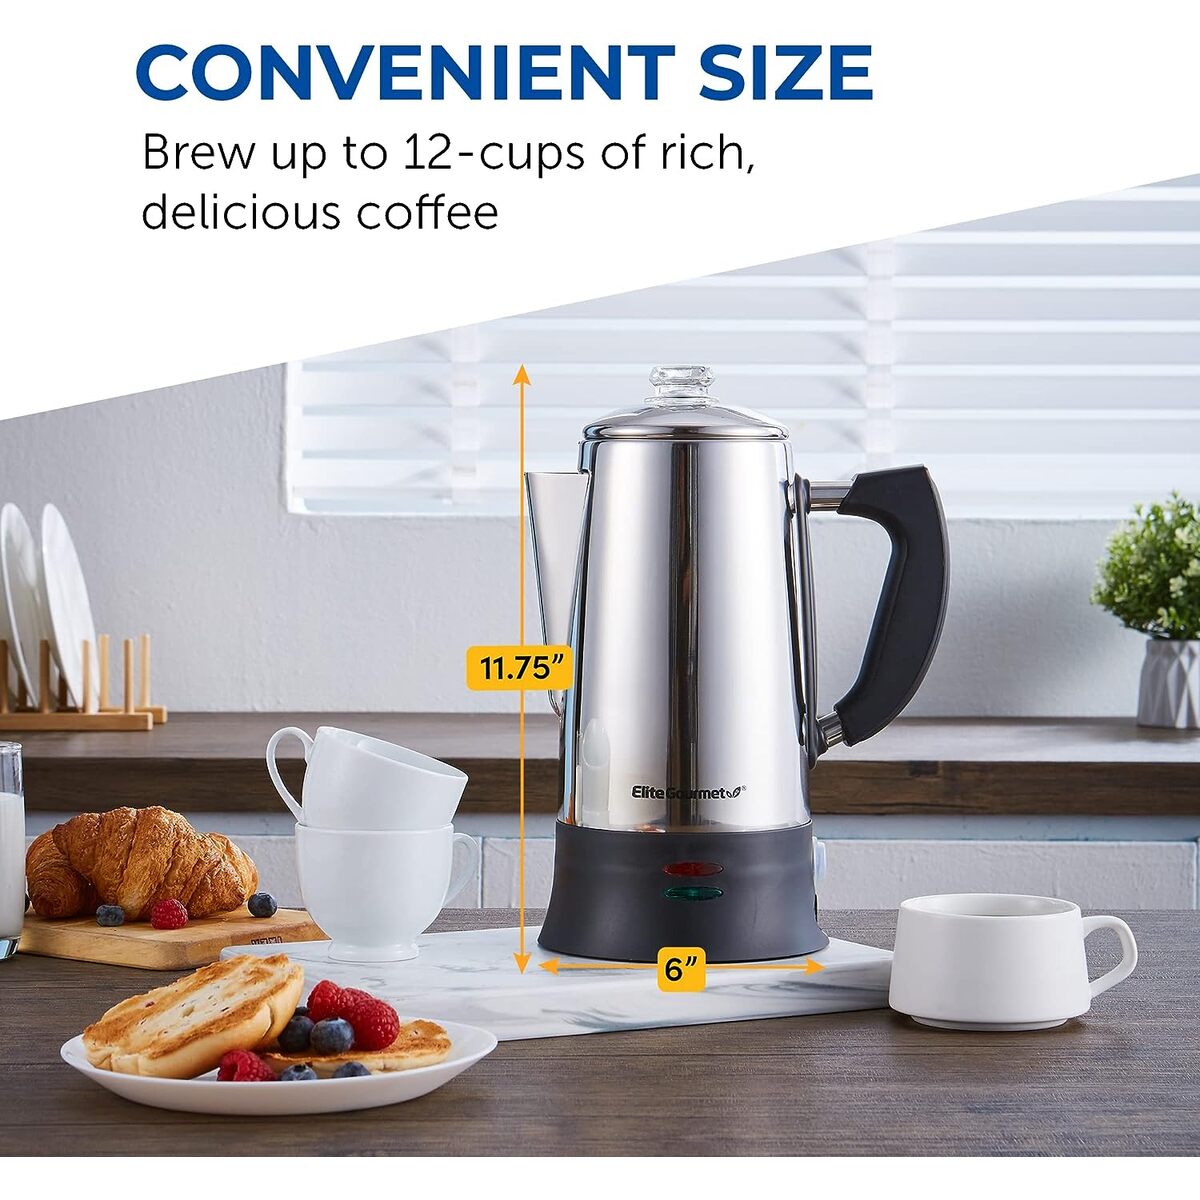 Elite Gourmet 12 Cup Stainless Steel Percolator with Glass Knob